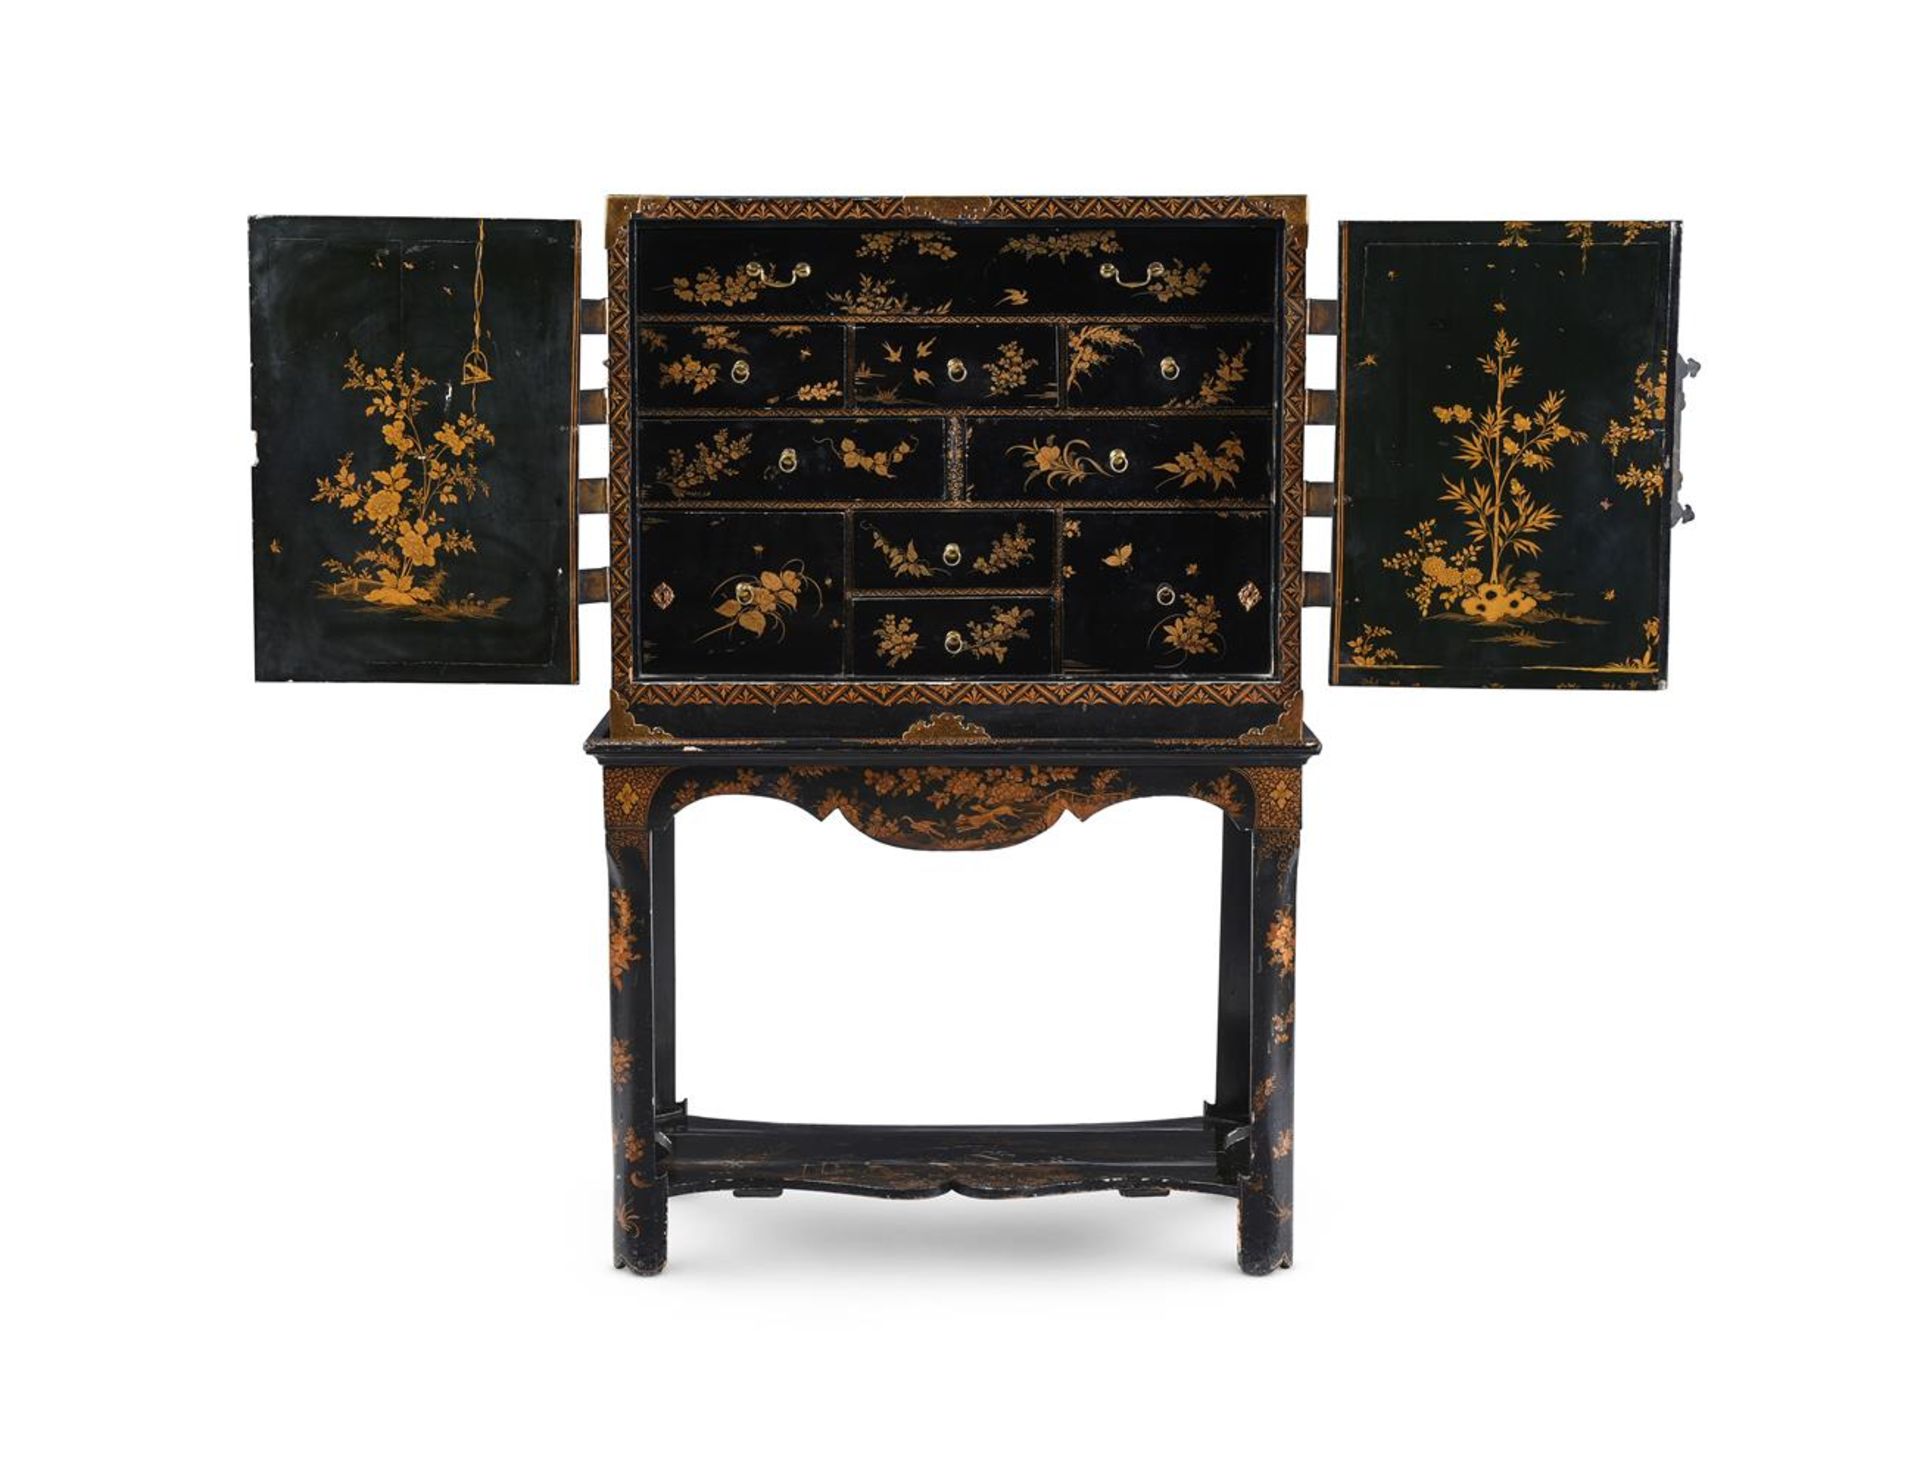 A BLACK LACQUER AND GILT CHINOISERIE DECORATED CABINET ON STAND, 18TH CENTURY - Image 2 of 7